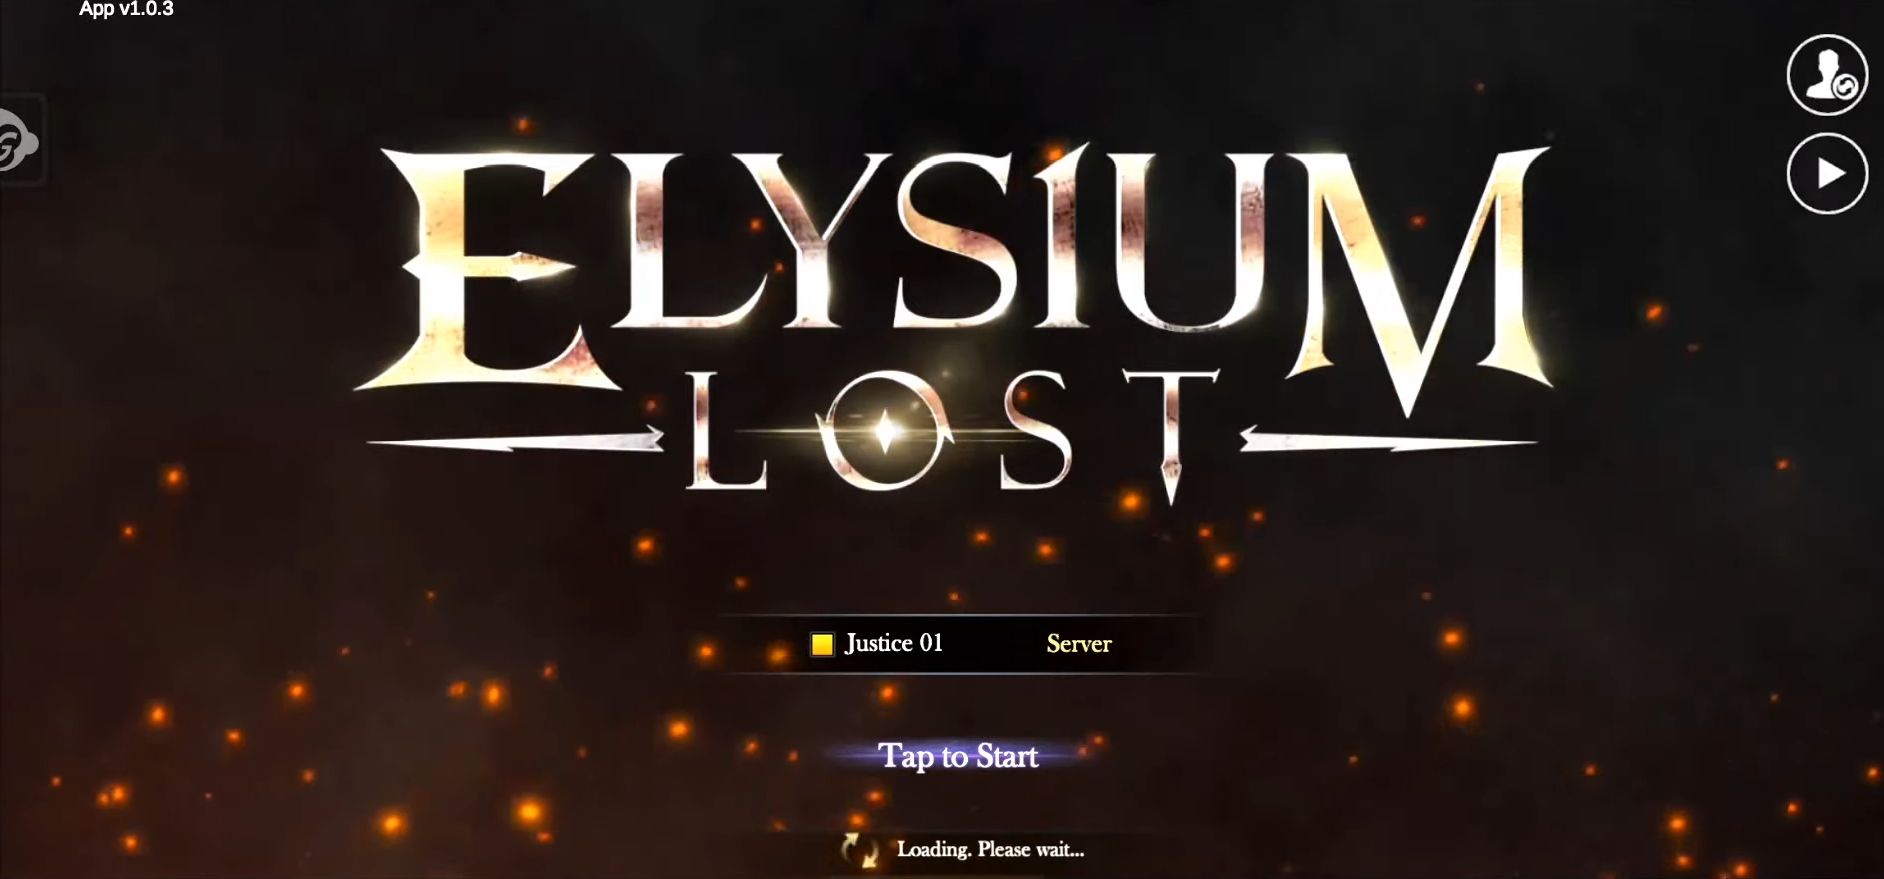 Download Elysium Lost Android free game.